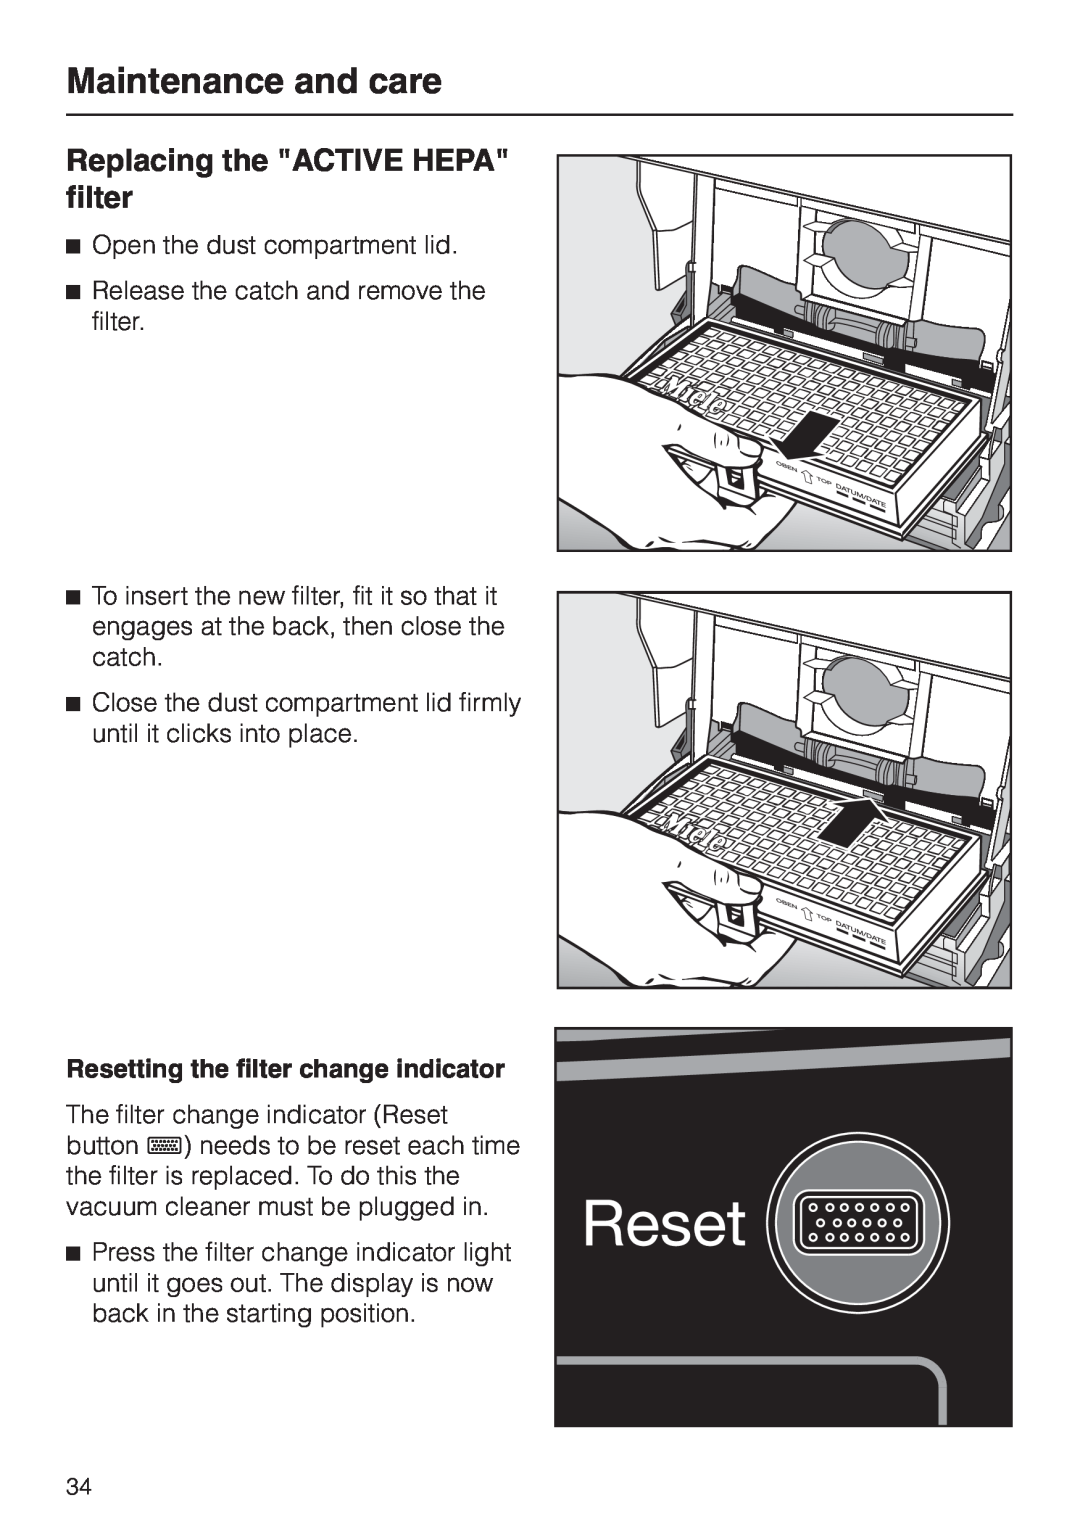 Miele S 658 manual Replacing the ACTIVE HEPA filter, Maintenance and care, Resetting the filter change indicator 